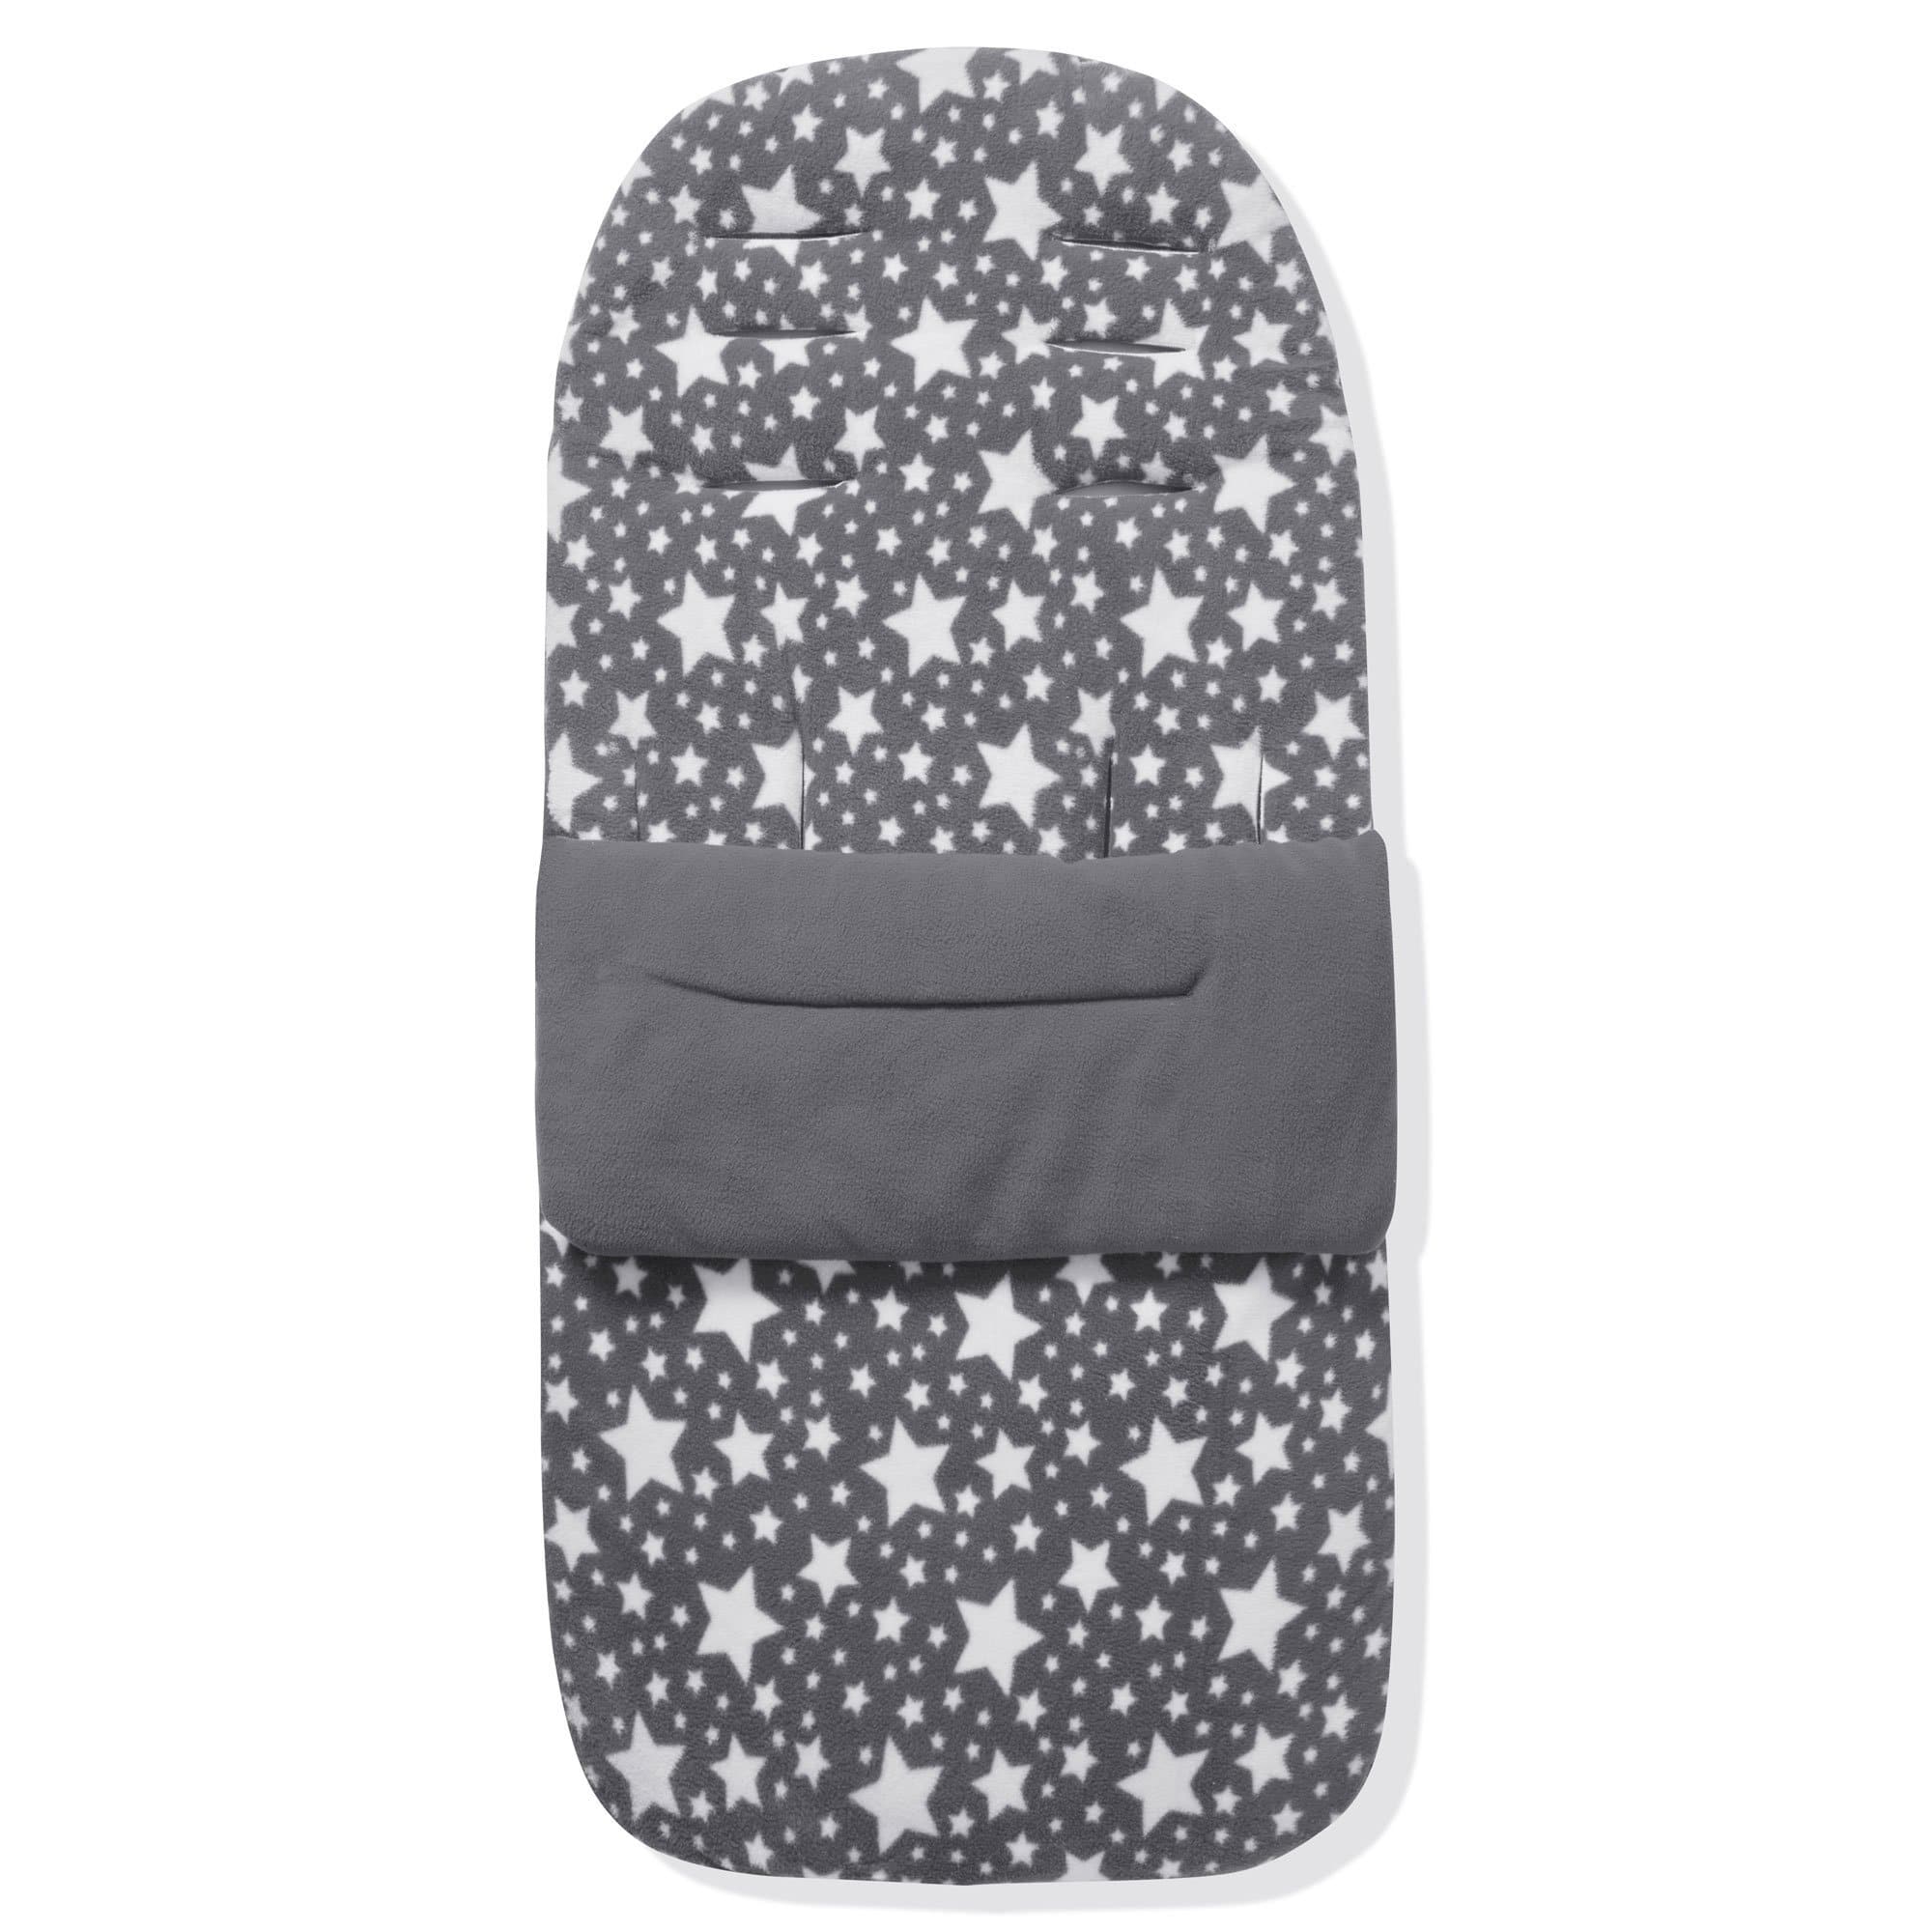 Fleece Footmuff / Cosy Toes Compatible with Casual - For Your Little One